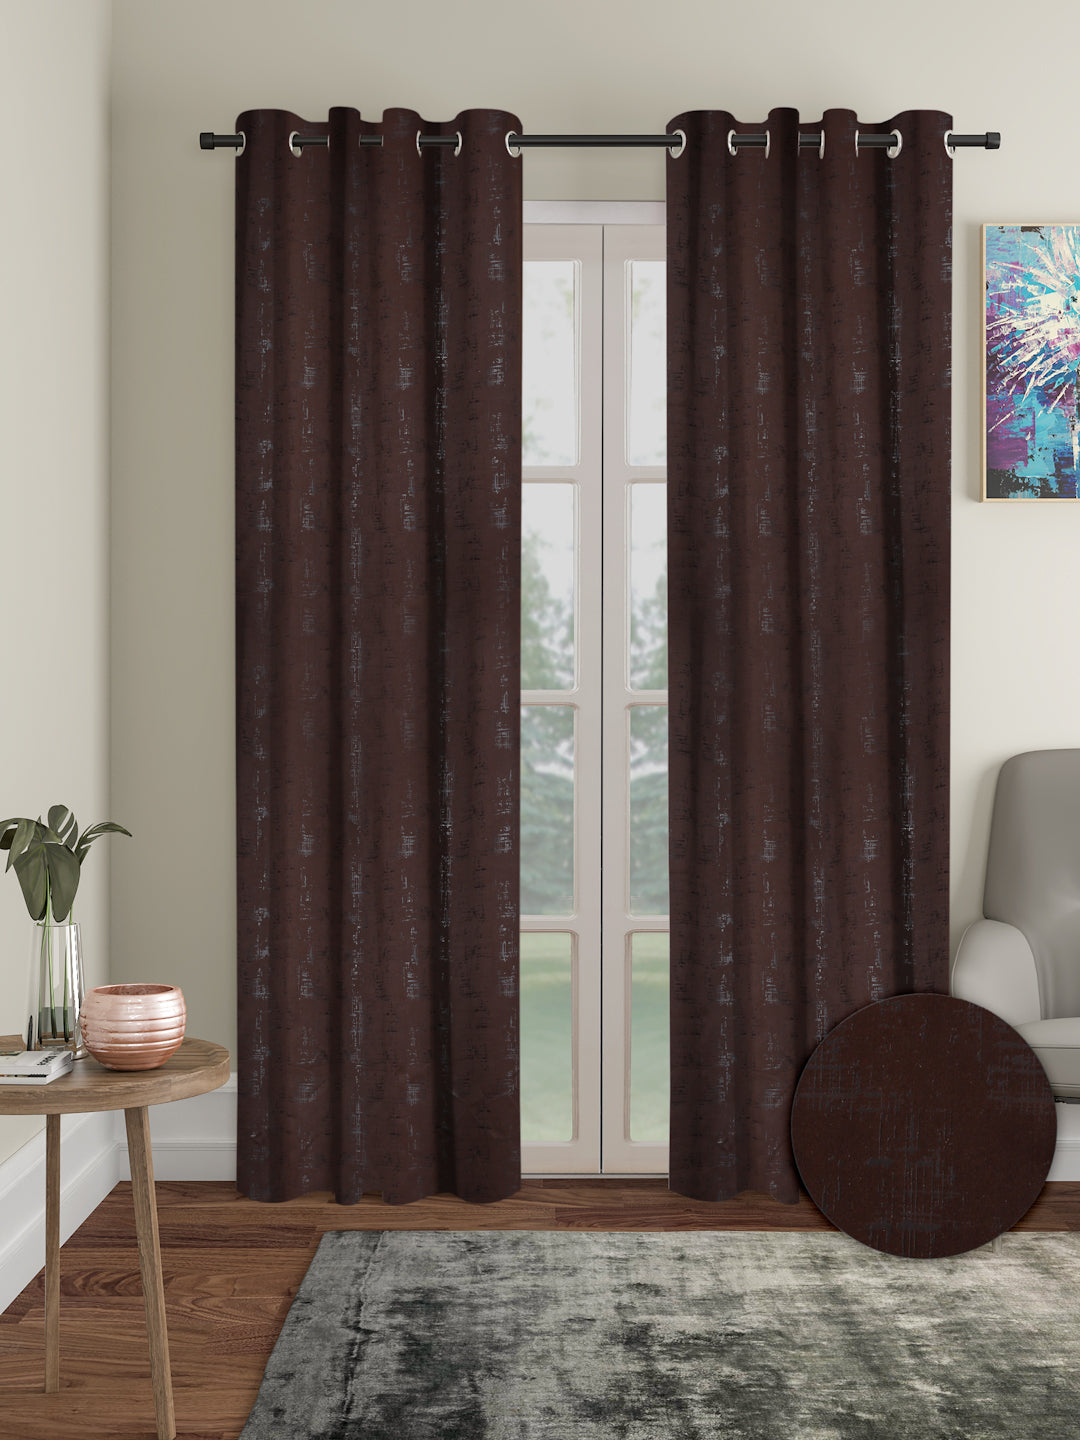 Pack of 2 Polyester Blackout Emboss Door Curtains- Brown